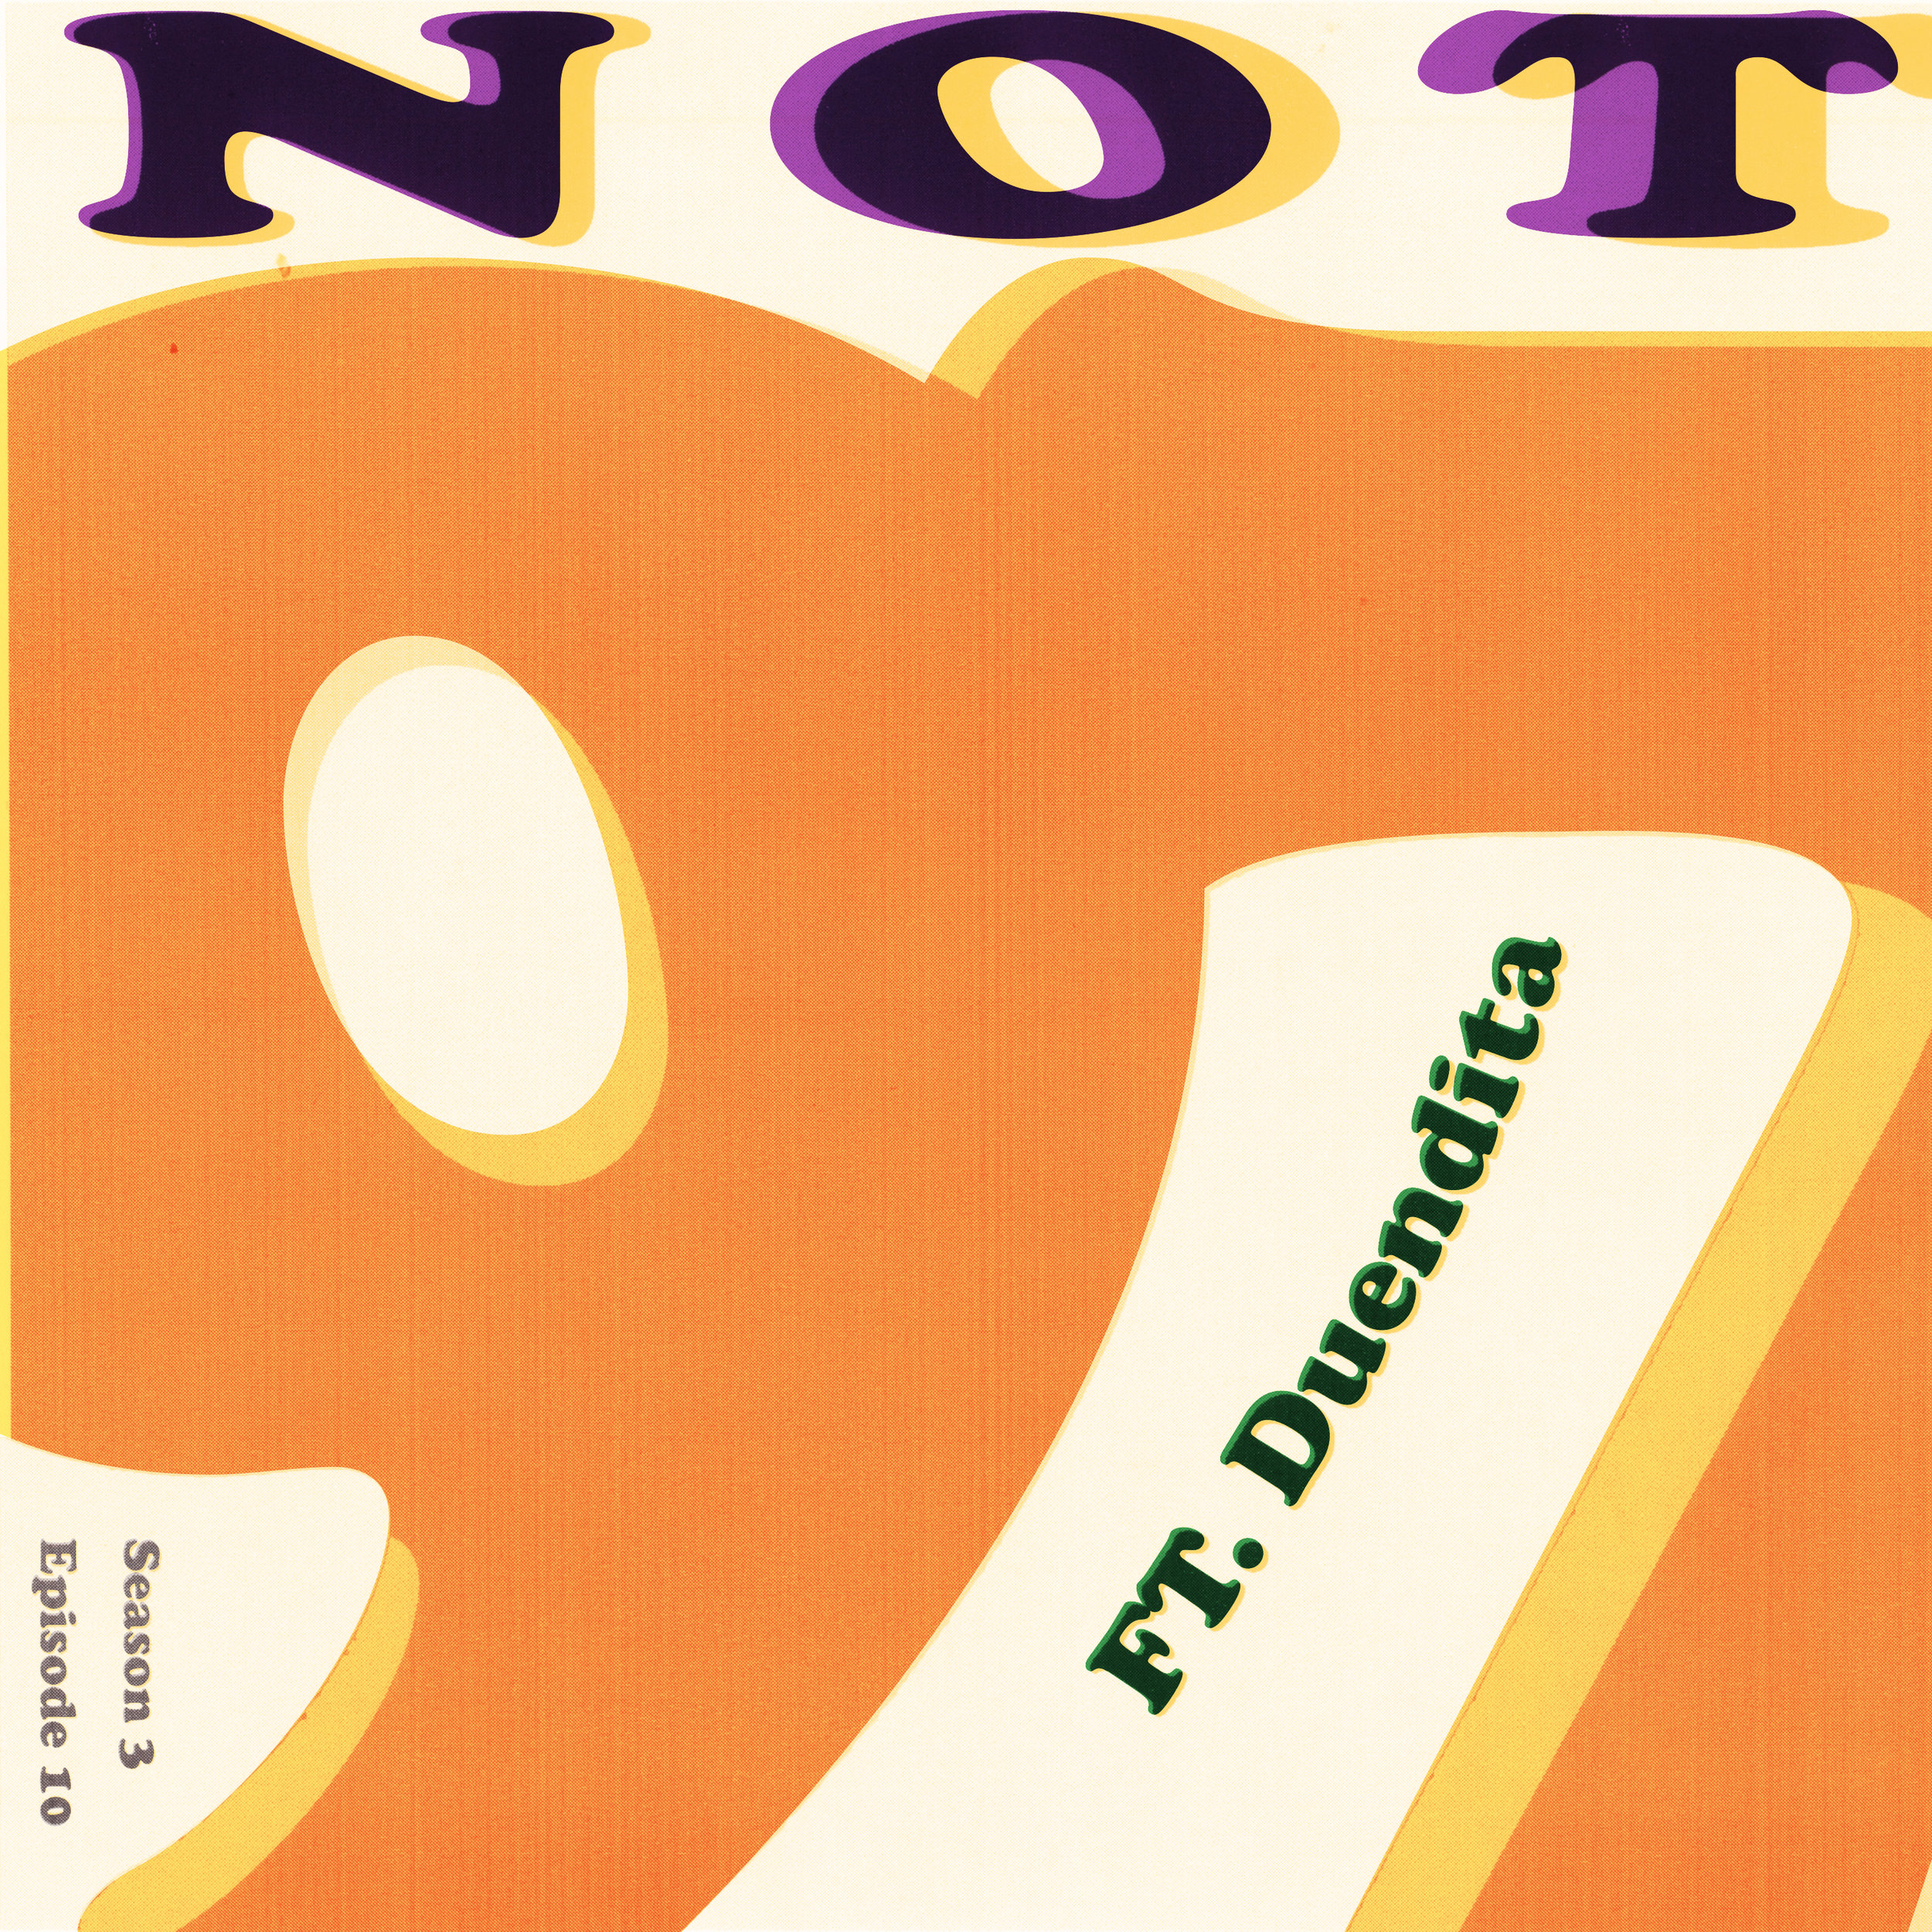 Not97_Working_cover_2 (2).jpg